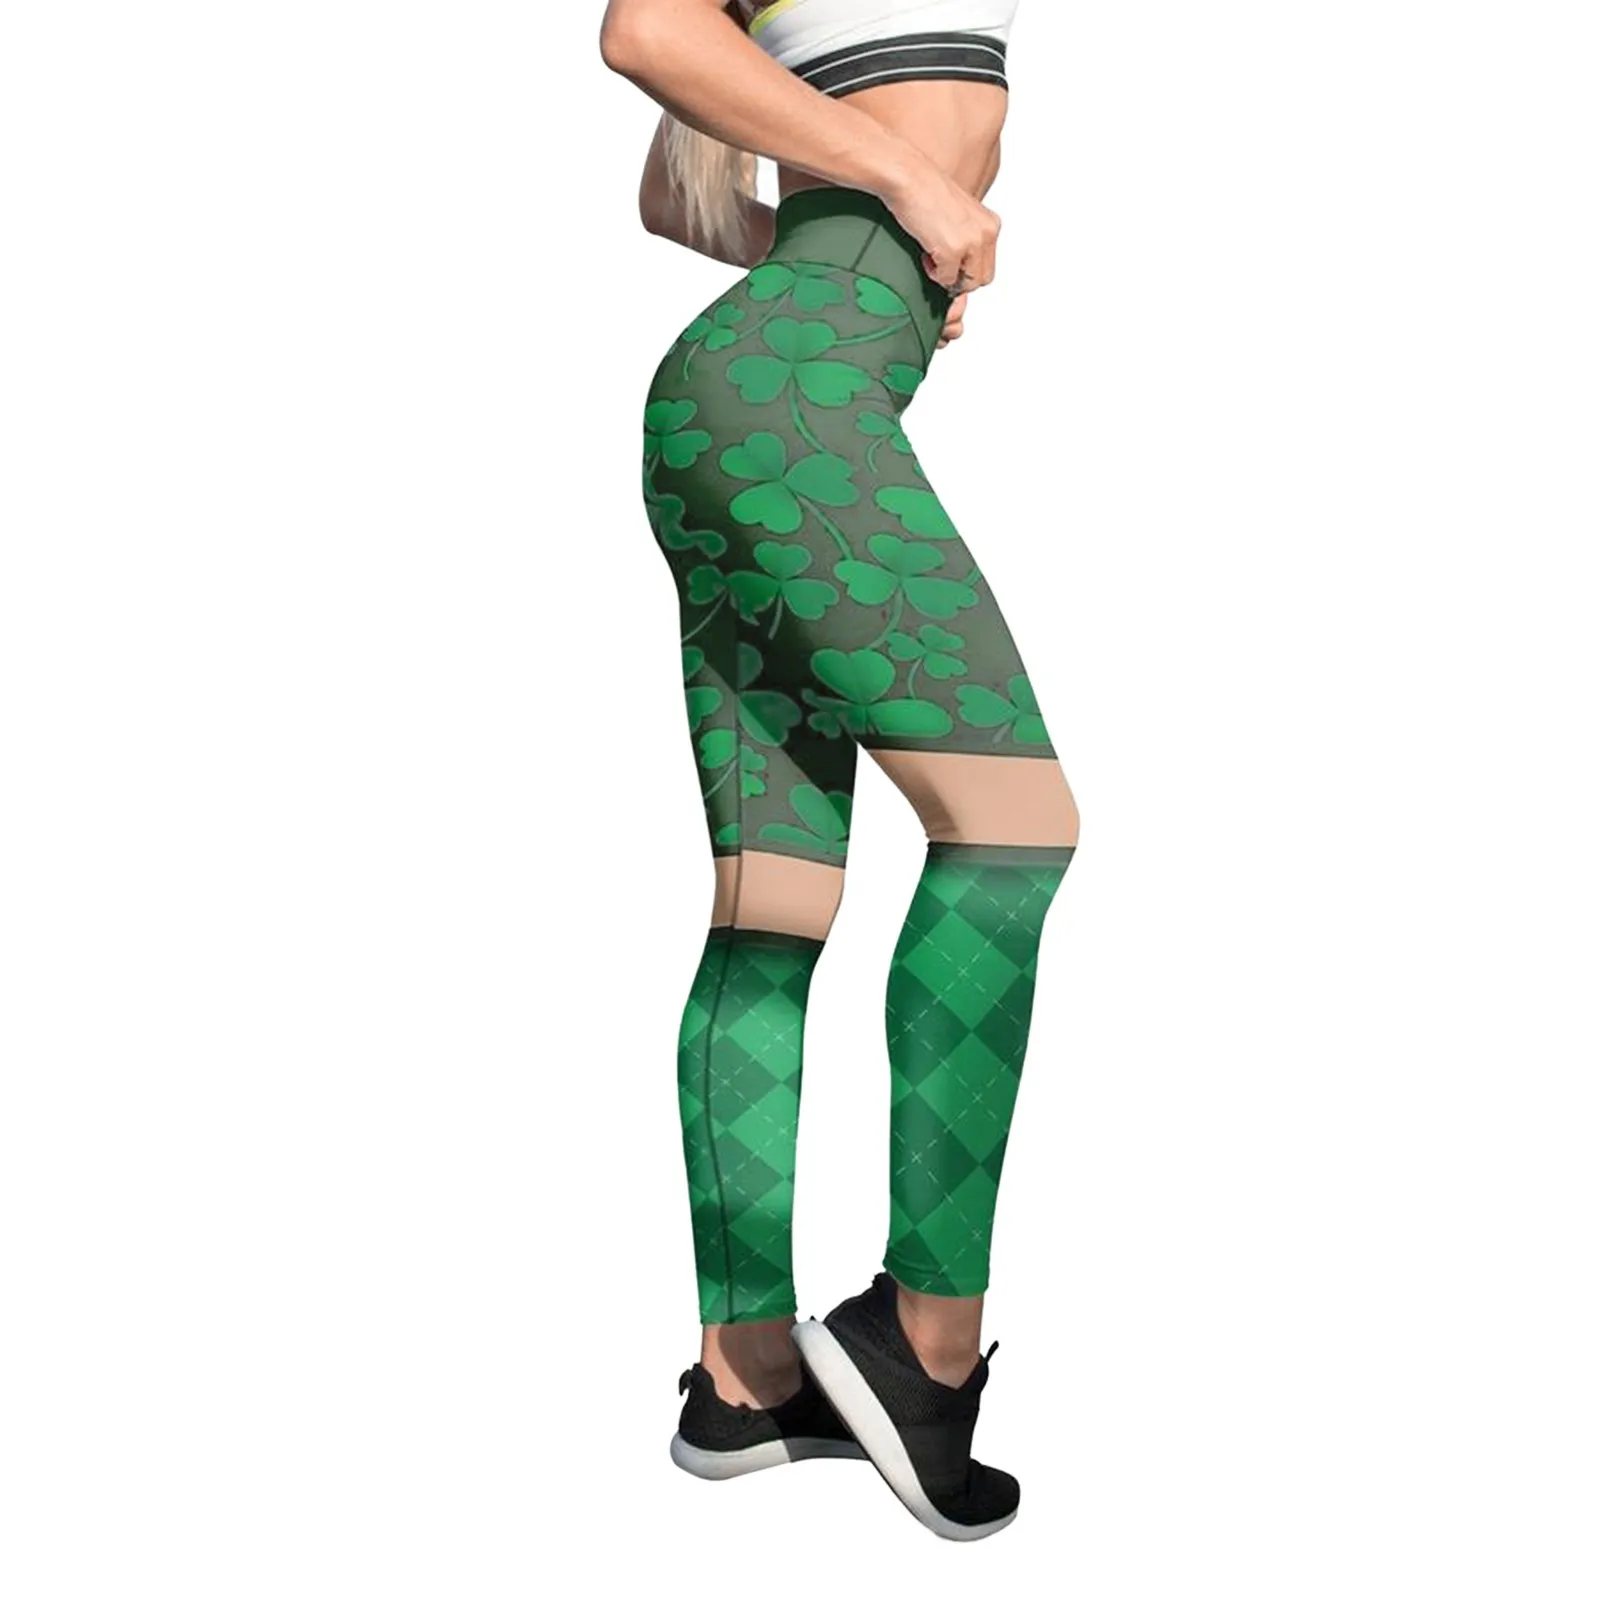 

Women's Butt Lifting Seamless Leggings Paddystripes Good Luck Clover Printed High-waist Push UP Hip Tights St. Patrick Day A40